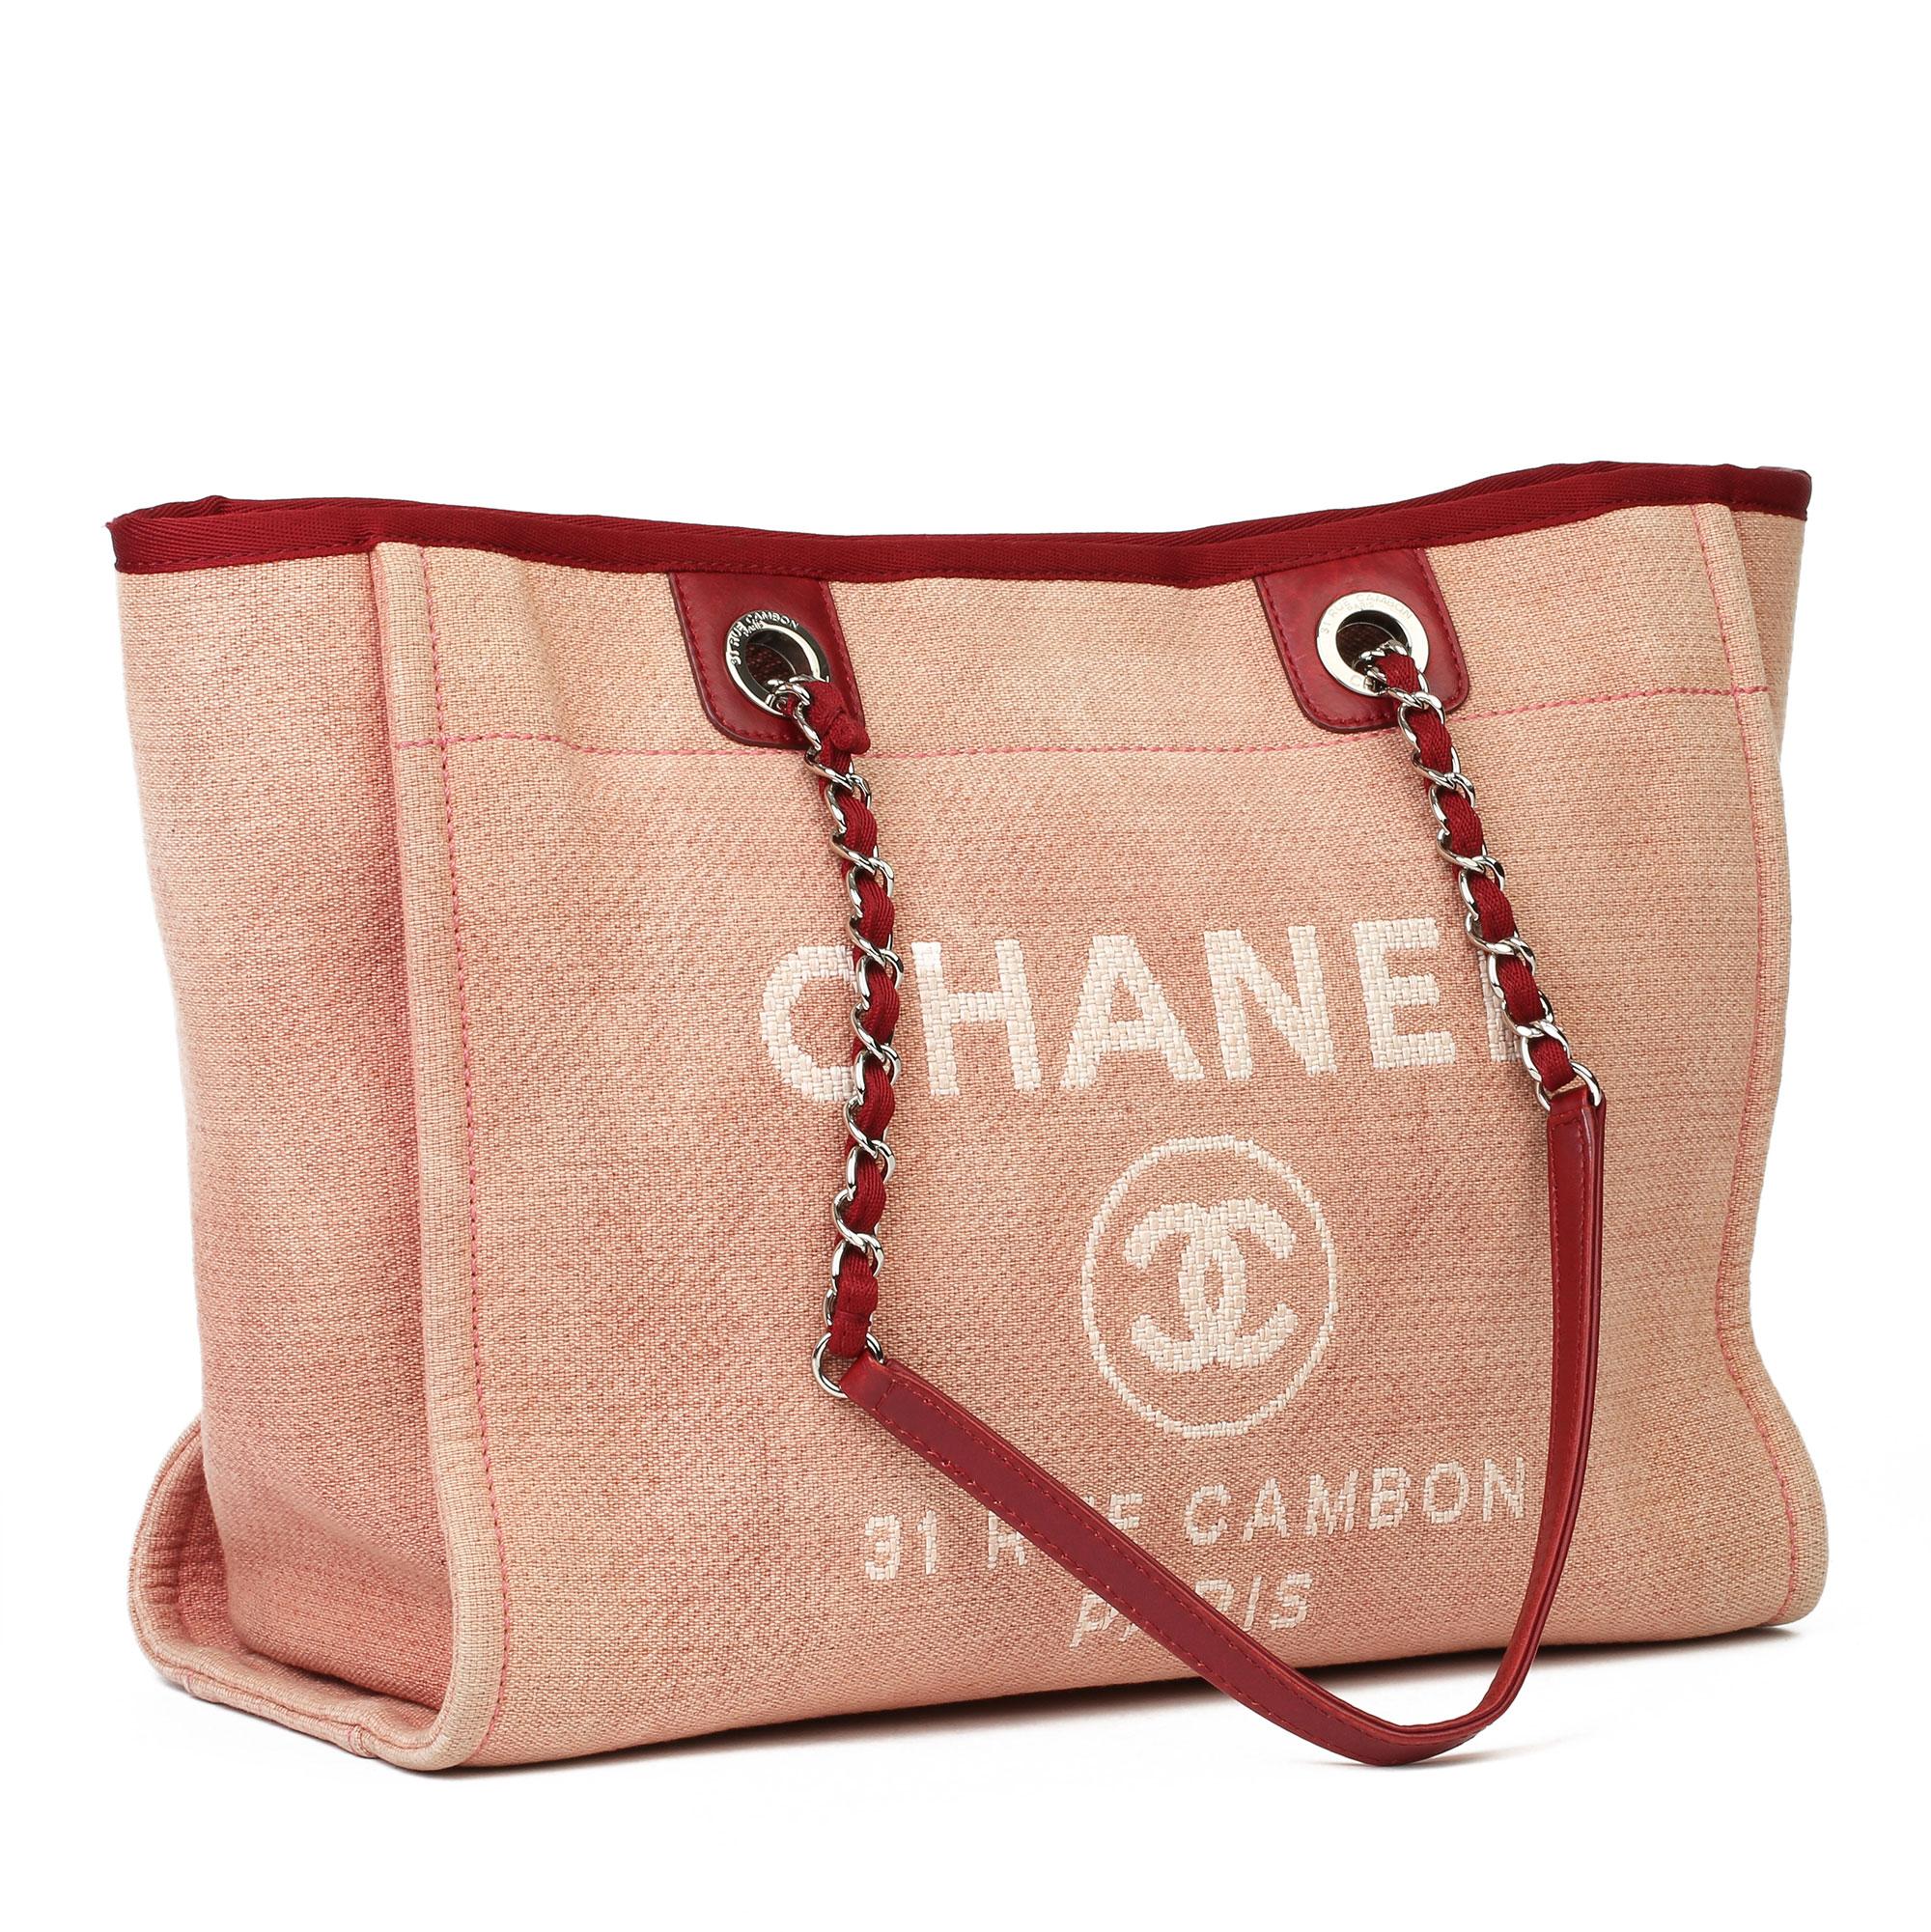 CHANEL
Red Canvas & Calfskin Leather Small Deauville Tote

Xupes Reference: CB286
Serial Number: 16058247
Age (Circa): 2012
Authenticity Details: Serial Sticker (Made in Italy) 
Gender: Ladies
Type: Tote, Shoulder

Colour: Red
Hardware: